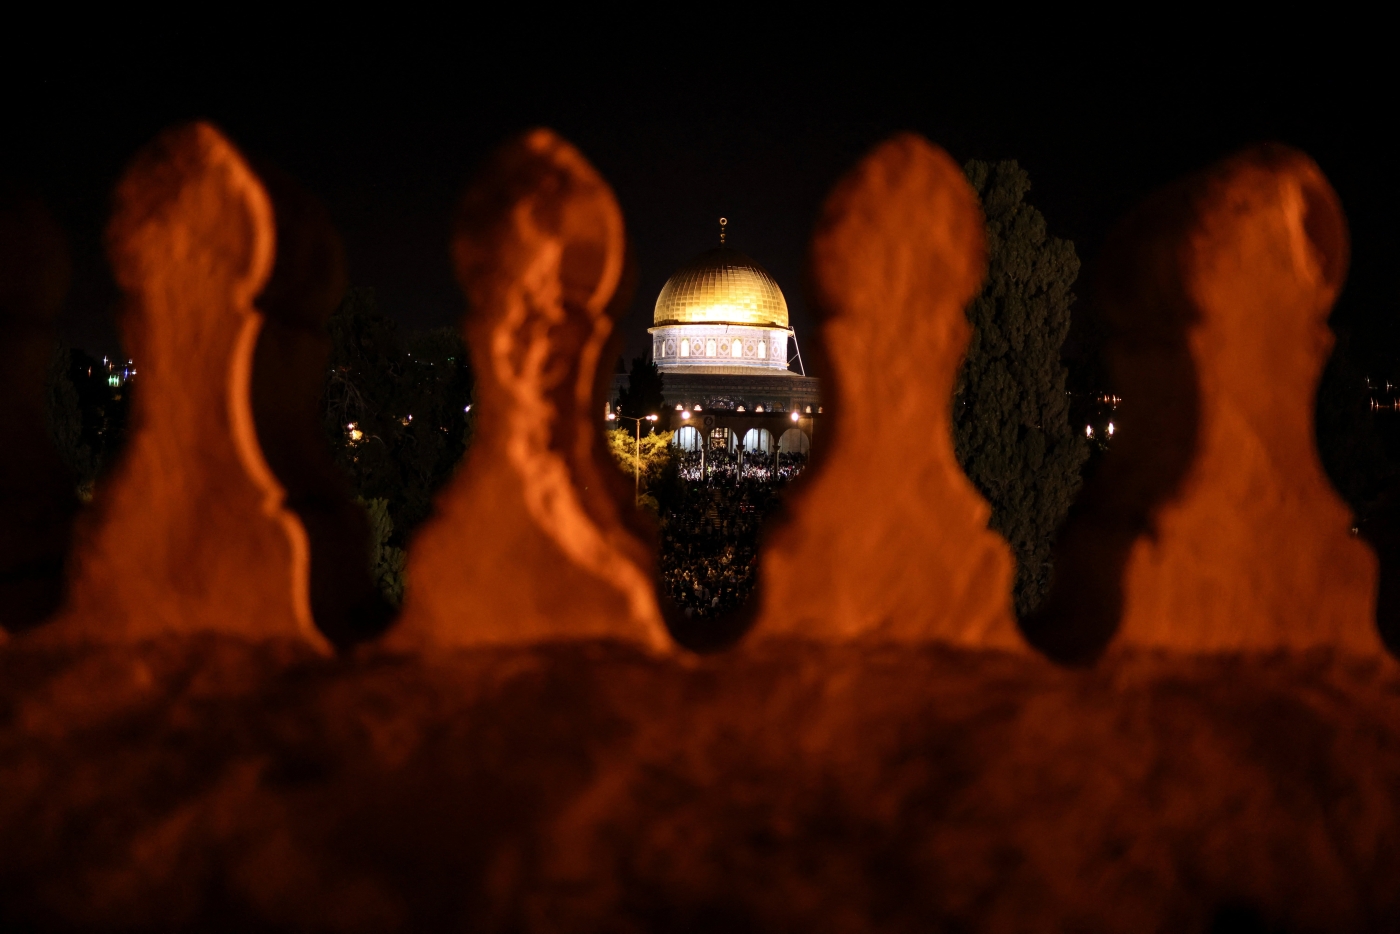 Palestinians pray on Laylat al-Qadr during the holy month of Ramadan, at Al-Aqsa Mosque on 27 April 2022 (Reuters)